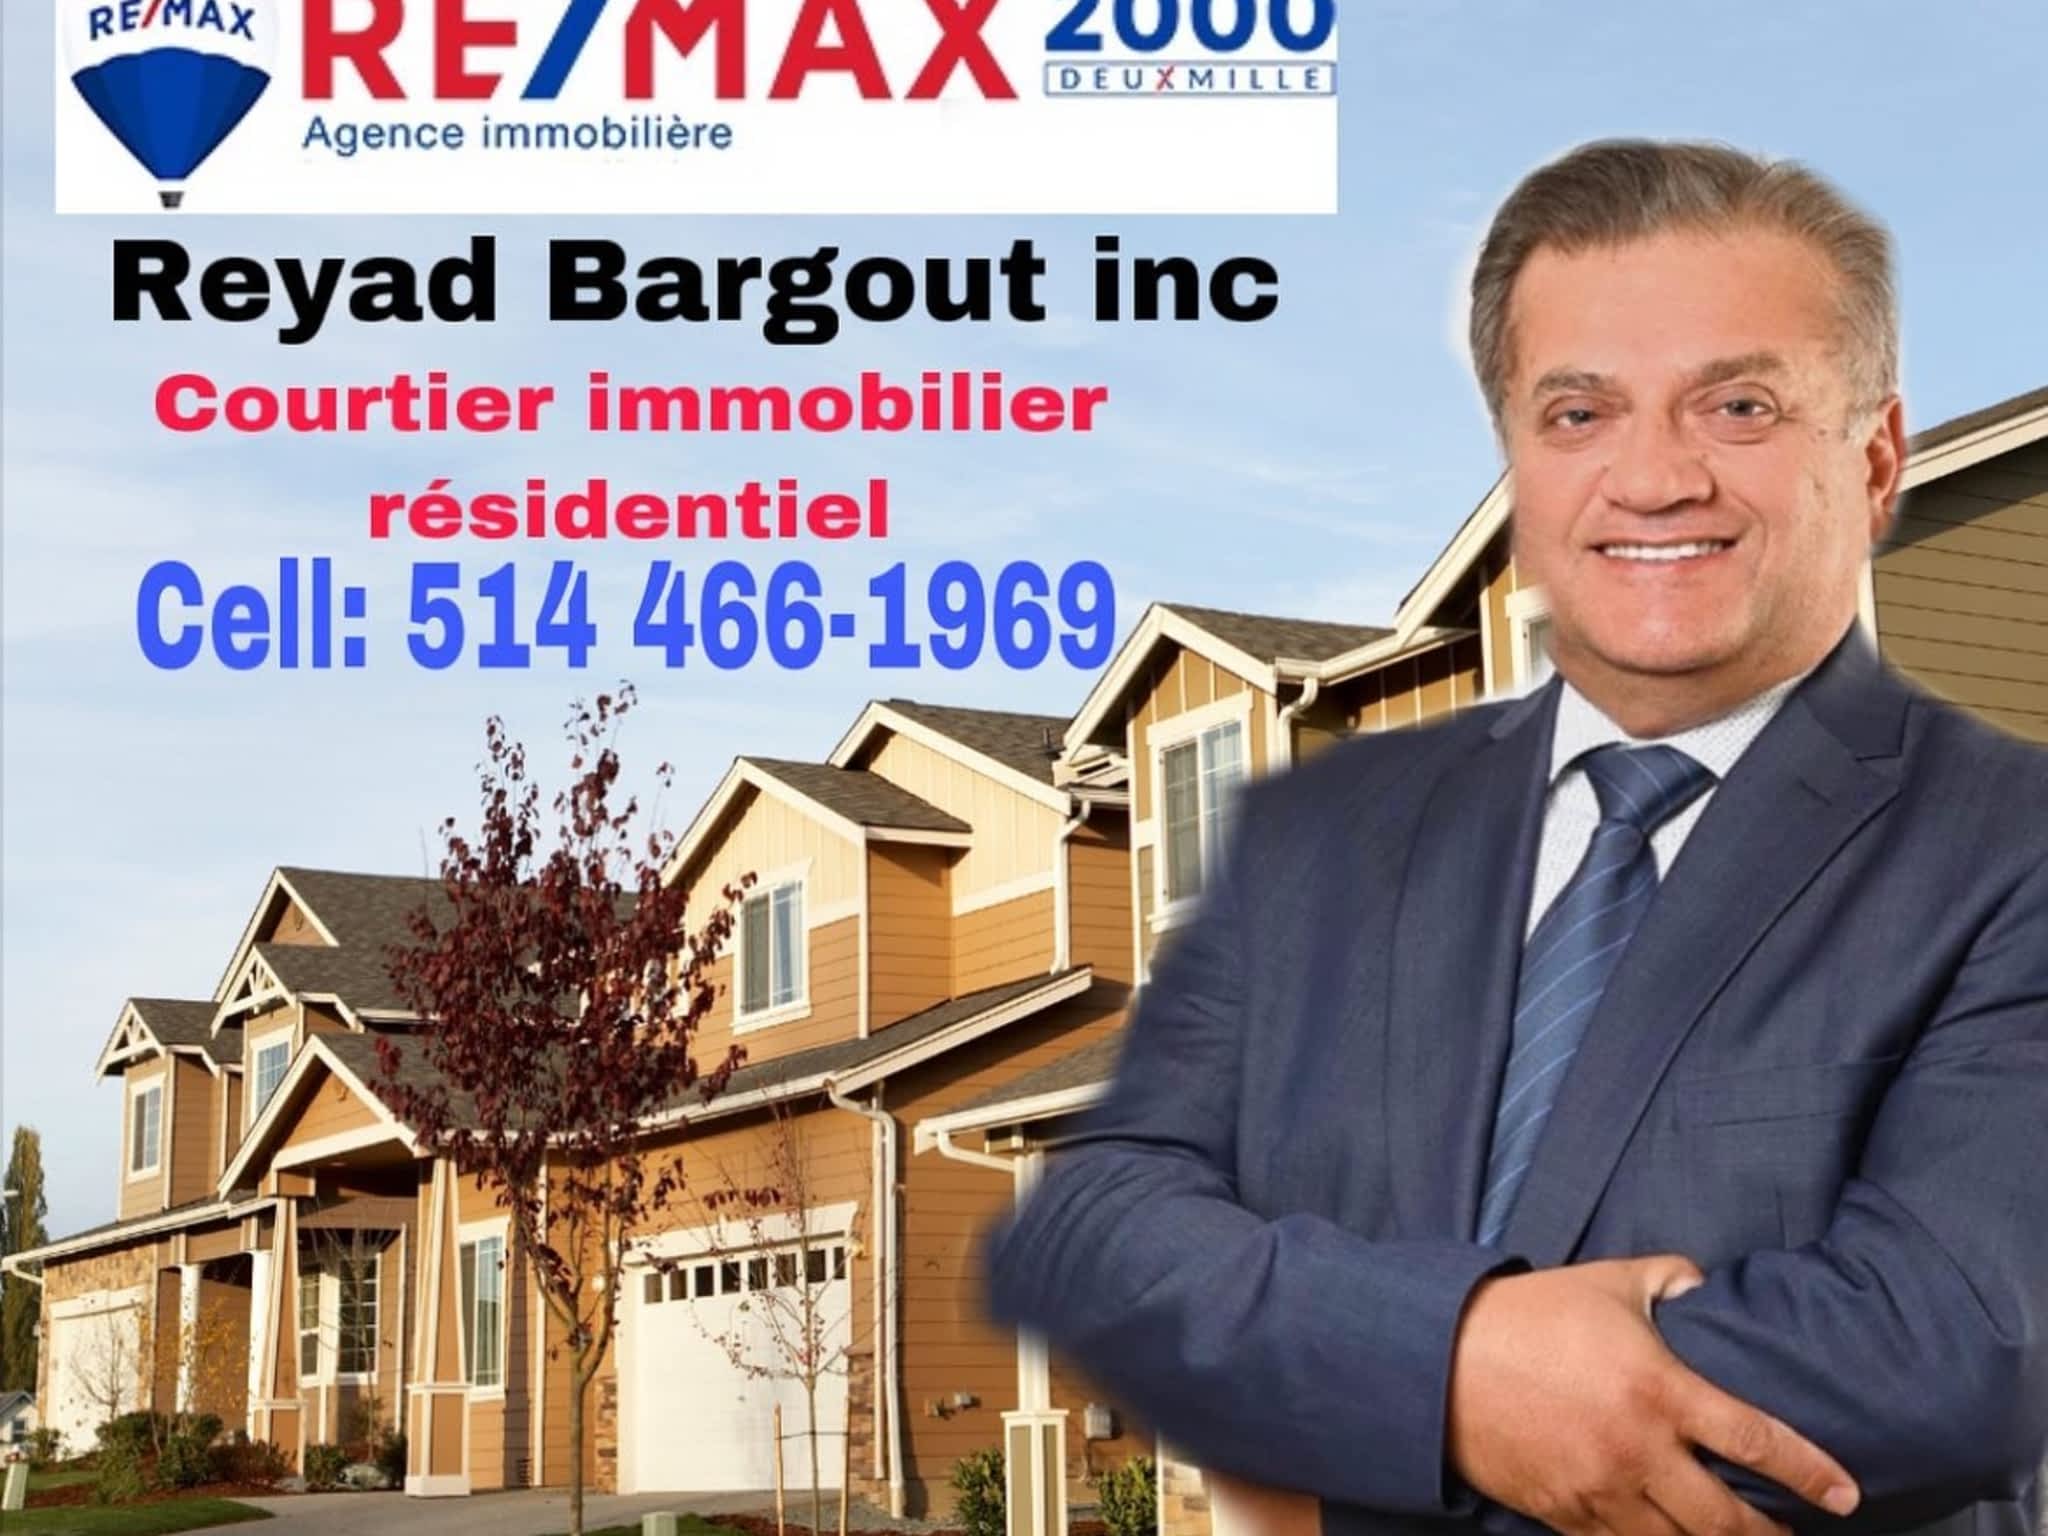 photo Reyad Bargout - Courtier Immobilier Remax 2000